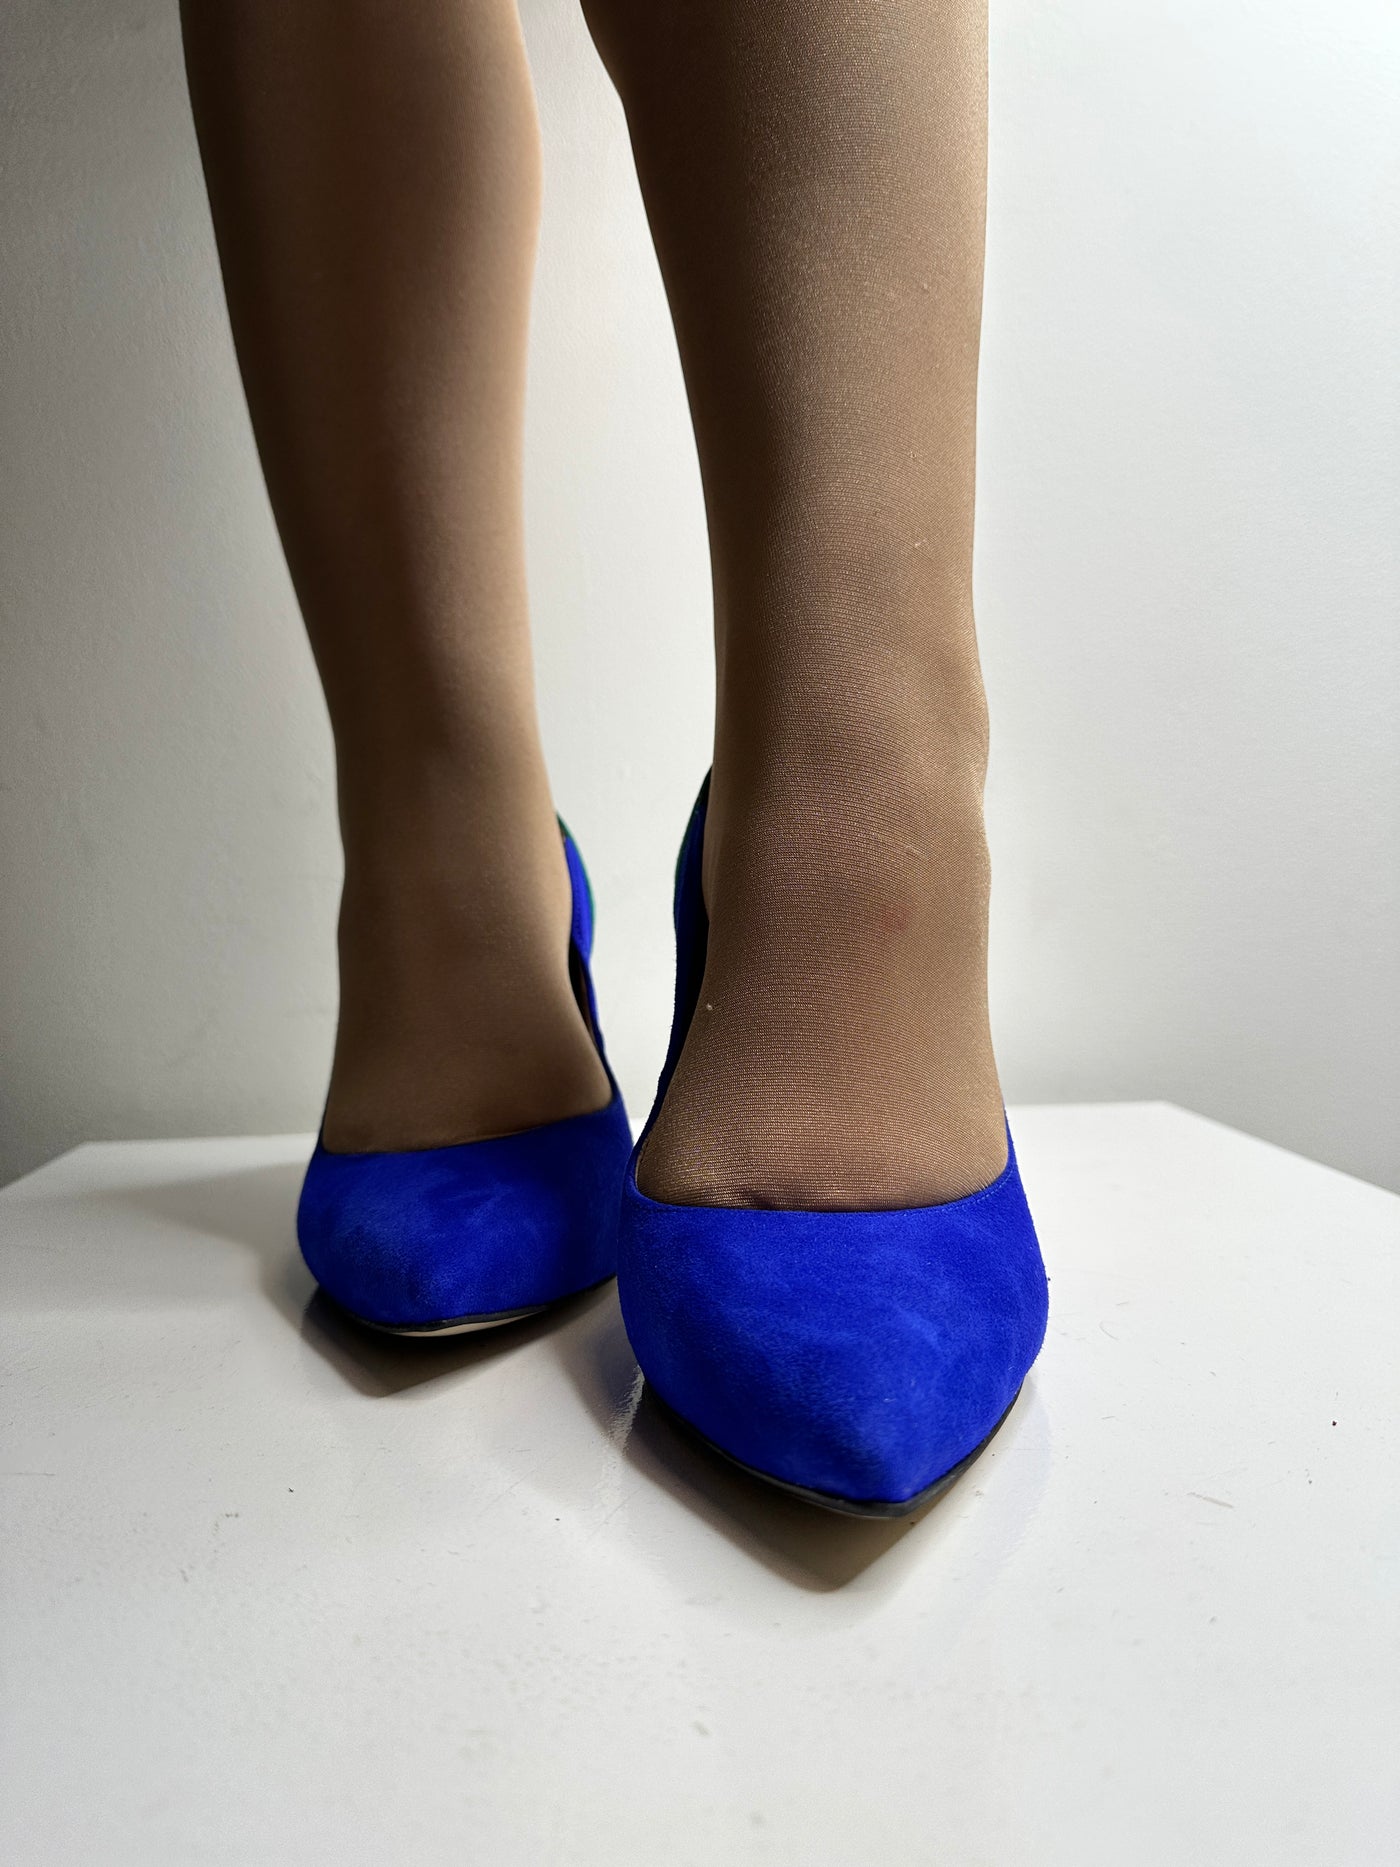 High Heel Cobalt Blue/Green Shoe With Pointed Toe